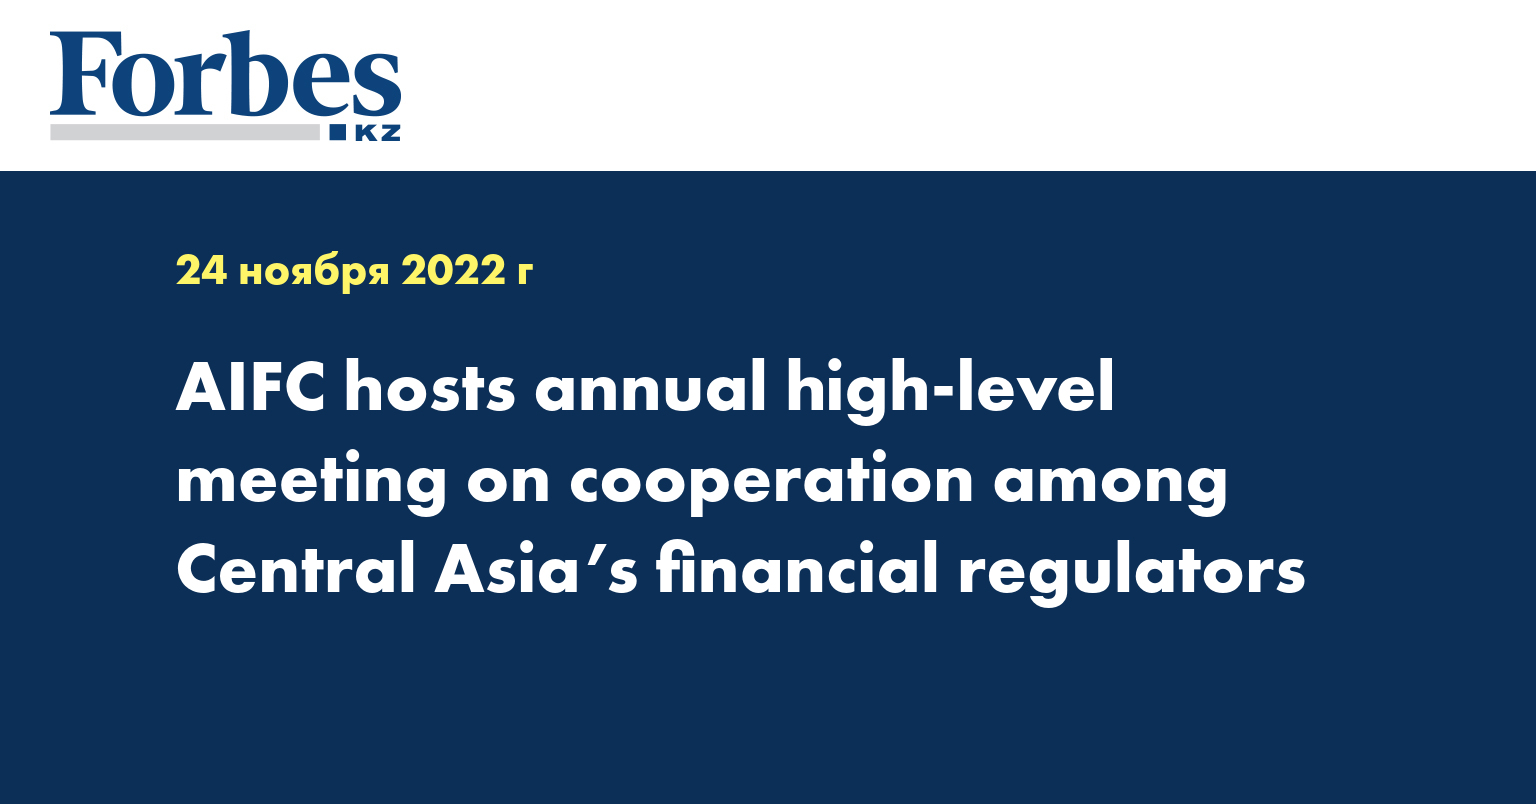 AIFC hosts annual high-level meeting on cooperation among Central Asia’s financial regulators